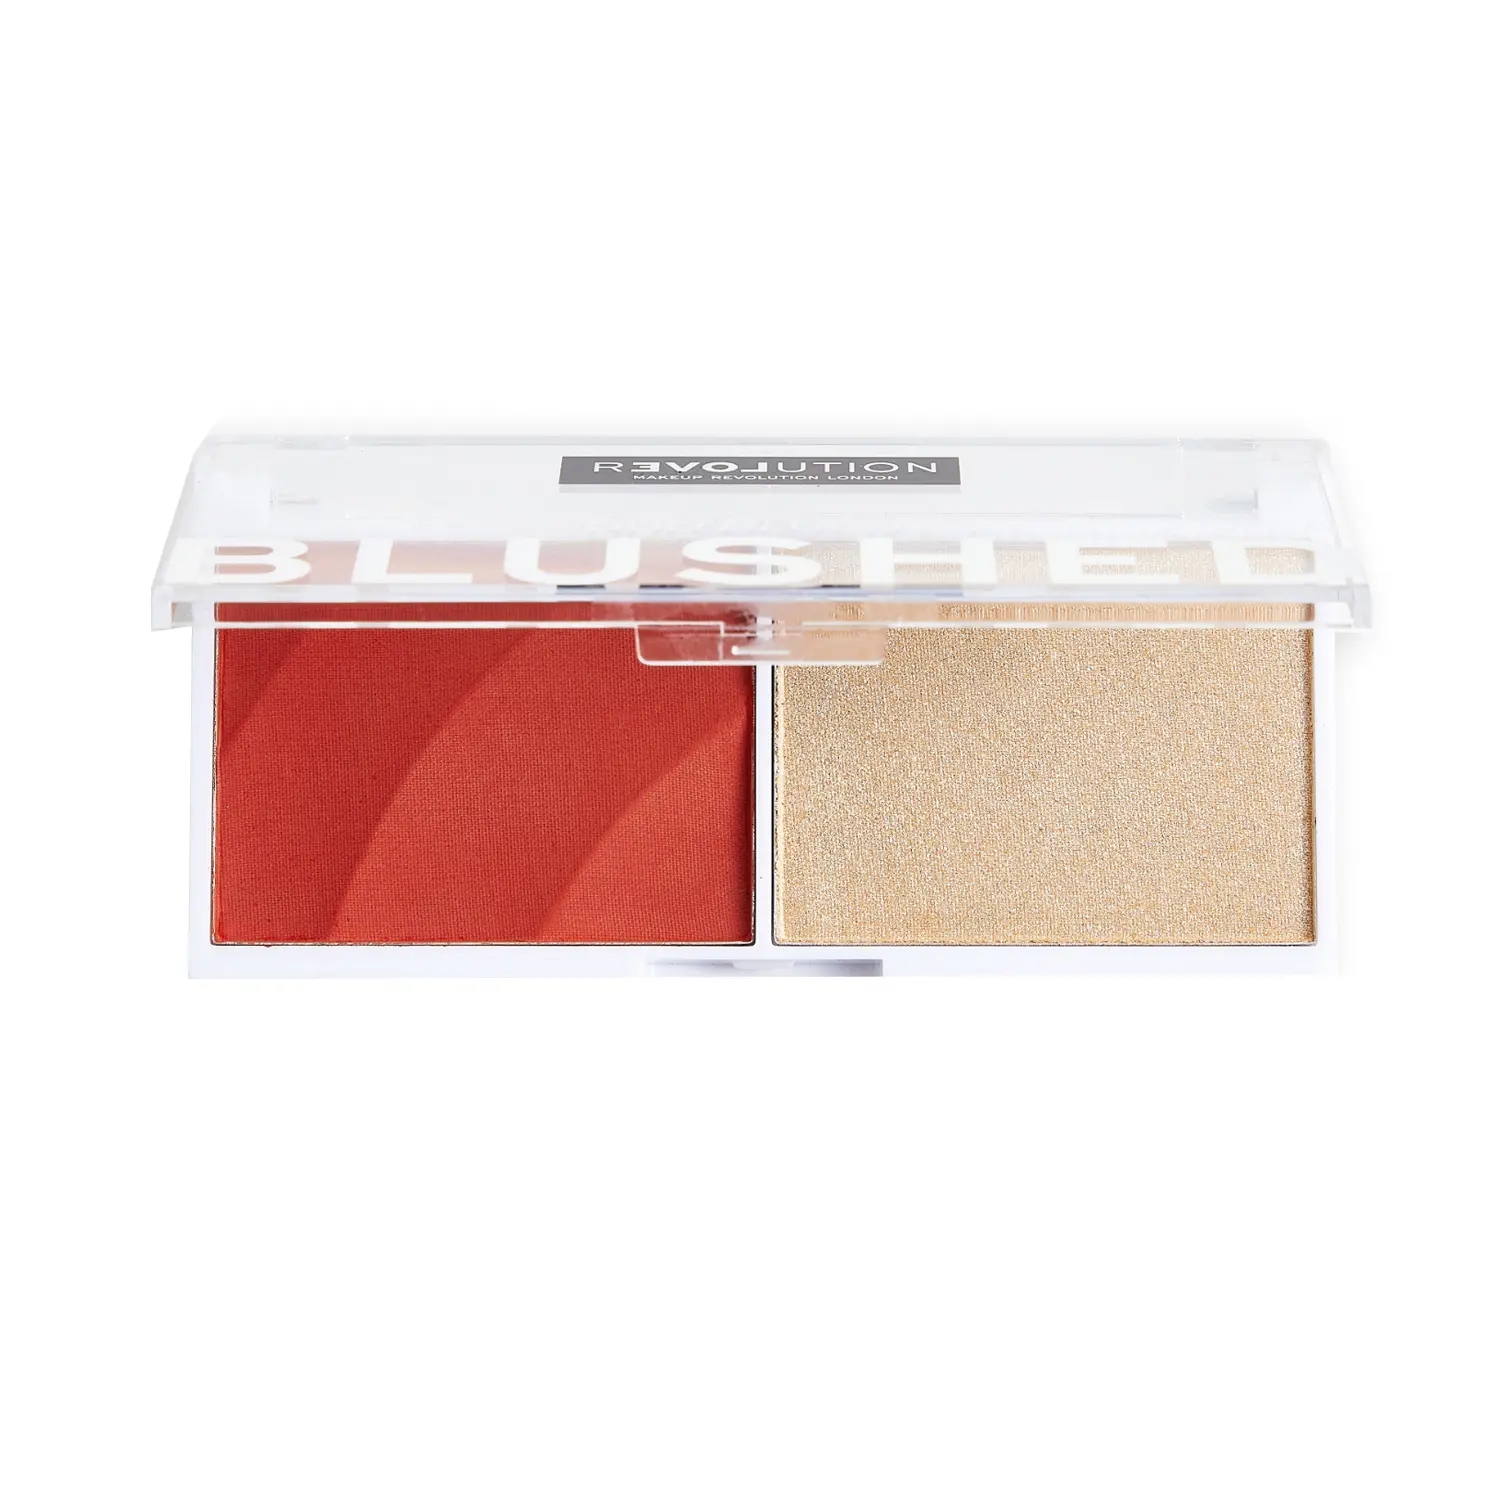 Makeup Revolution | Makeup Revolution Remove Colour Play Blushed Duo Face Palette - Daydream (5.8g)